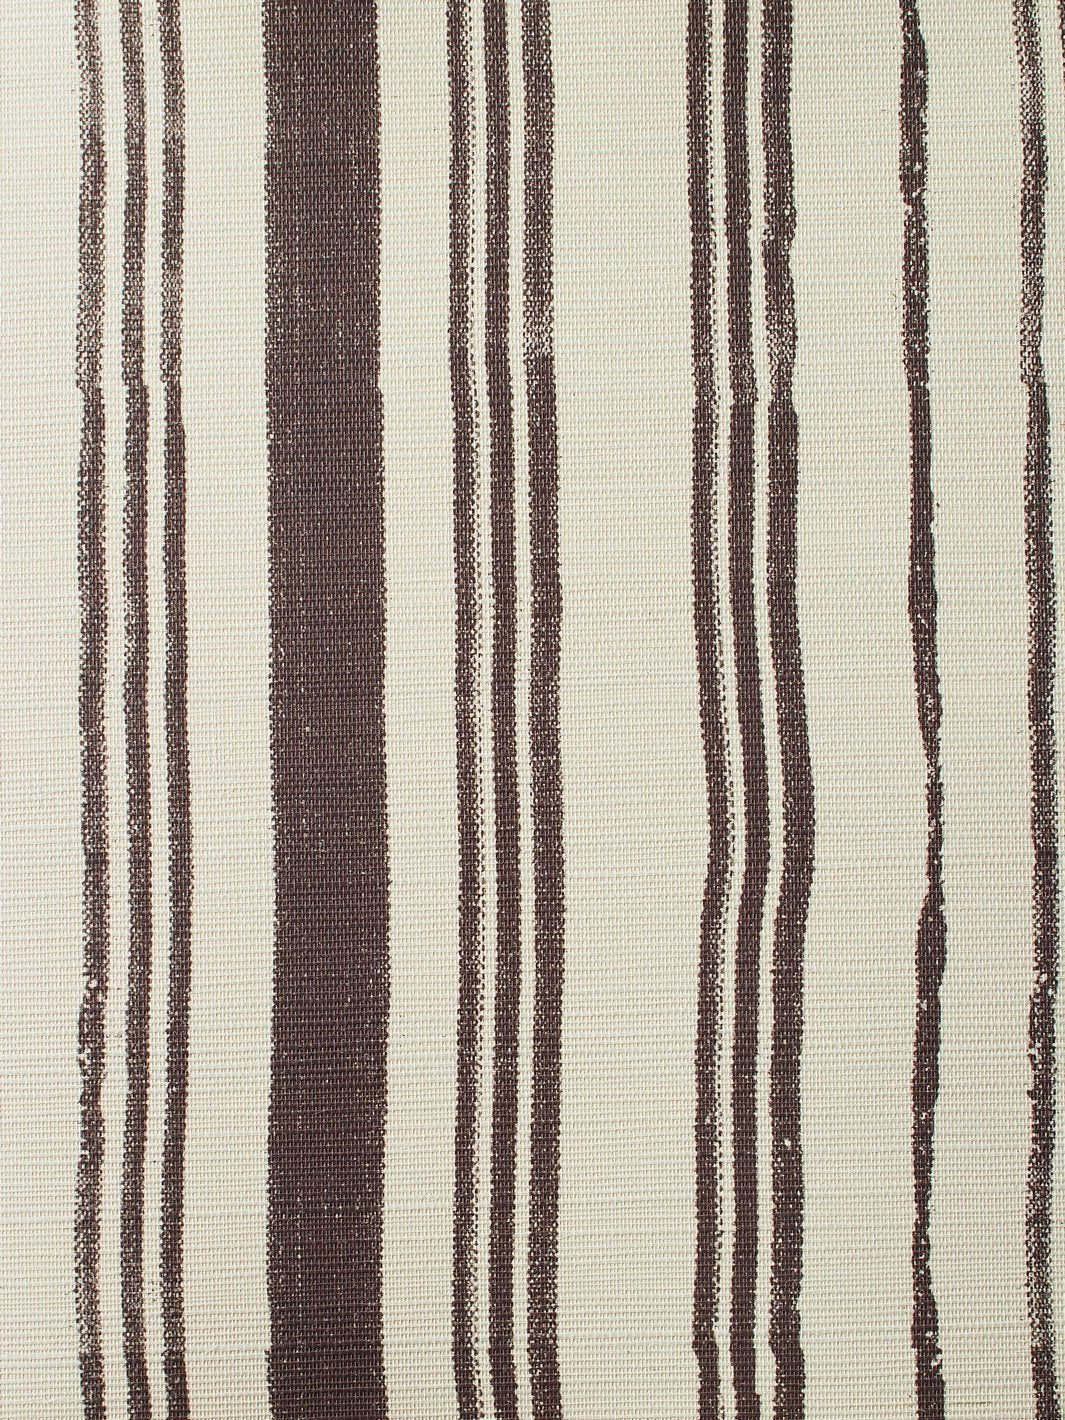 'Painted Stripes' Grasscloth' Wallpaper by Nathan Turner - Chocolate